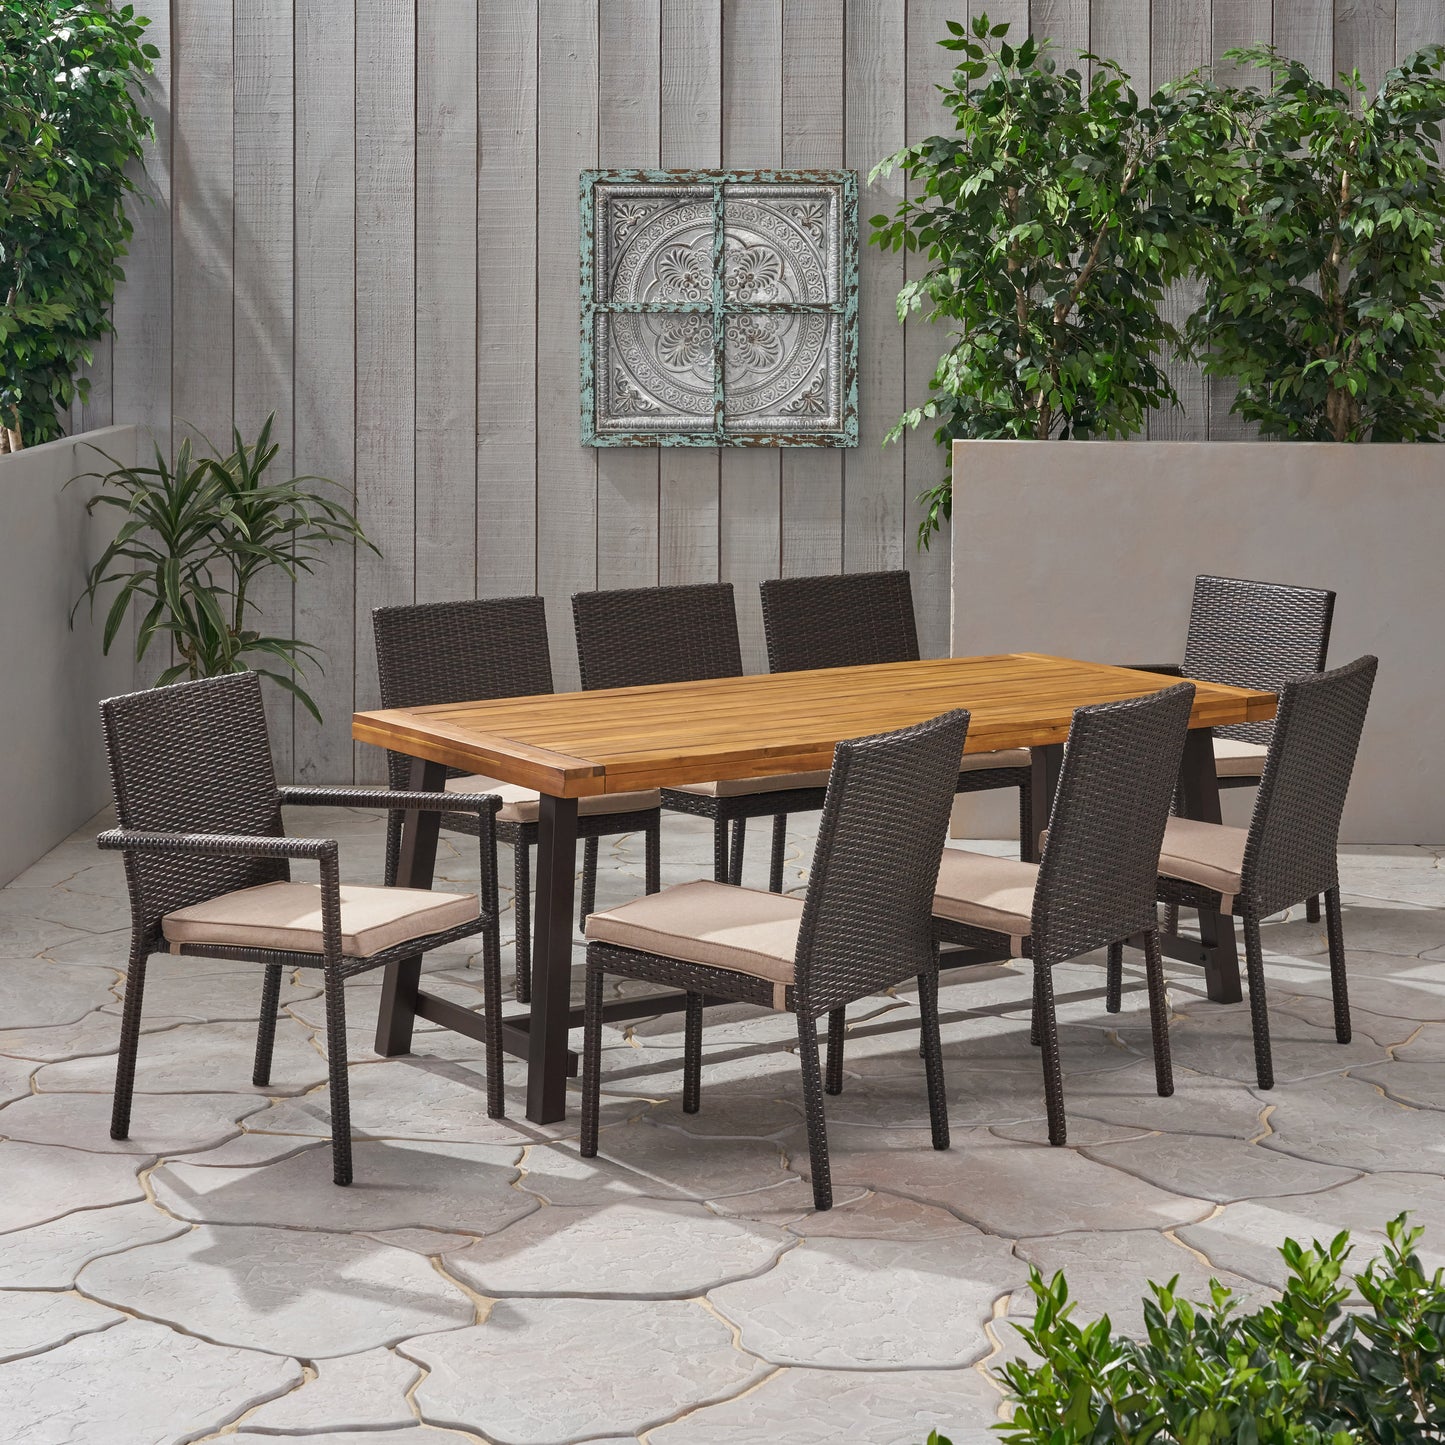 Princess Outdoor Wood and Wicker 8 Seater Dining Set